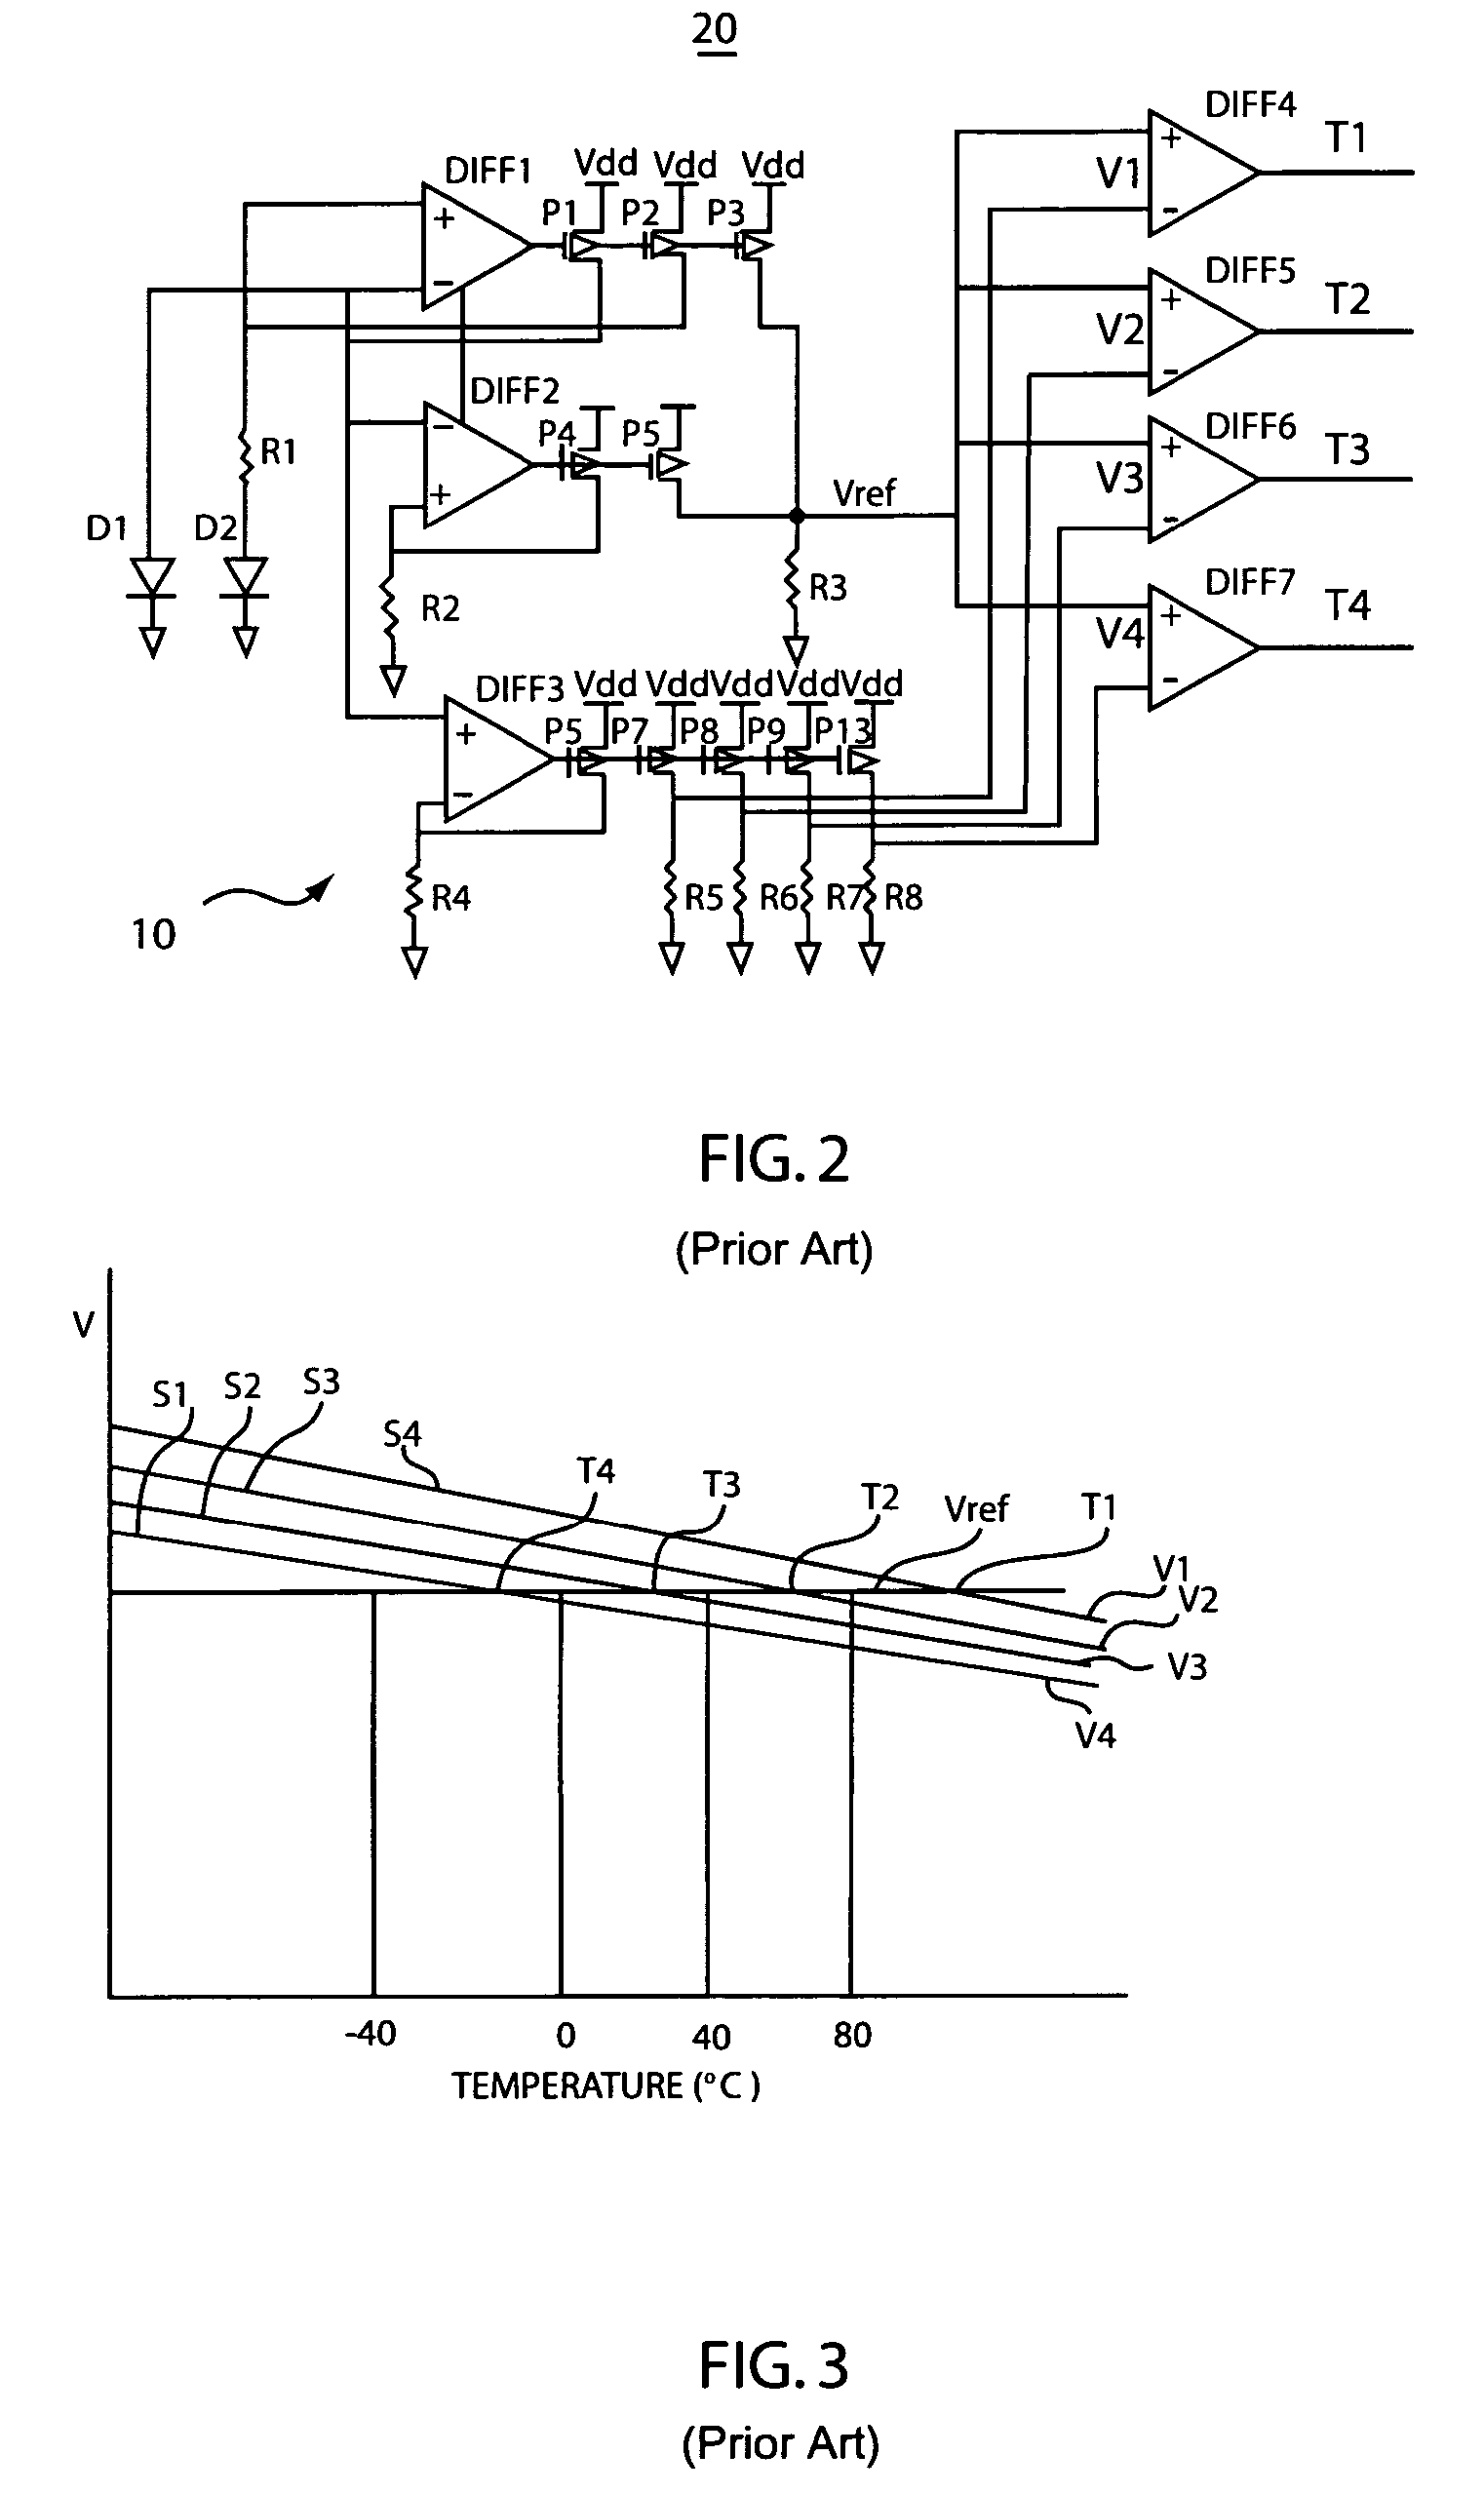 On-chip power supply regulator and temperature control system